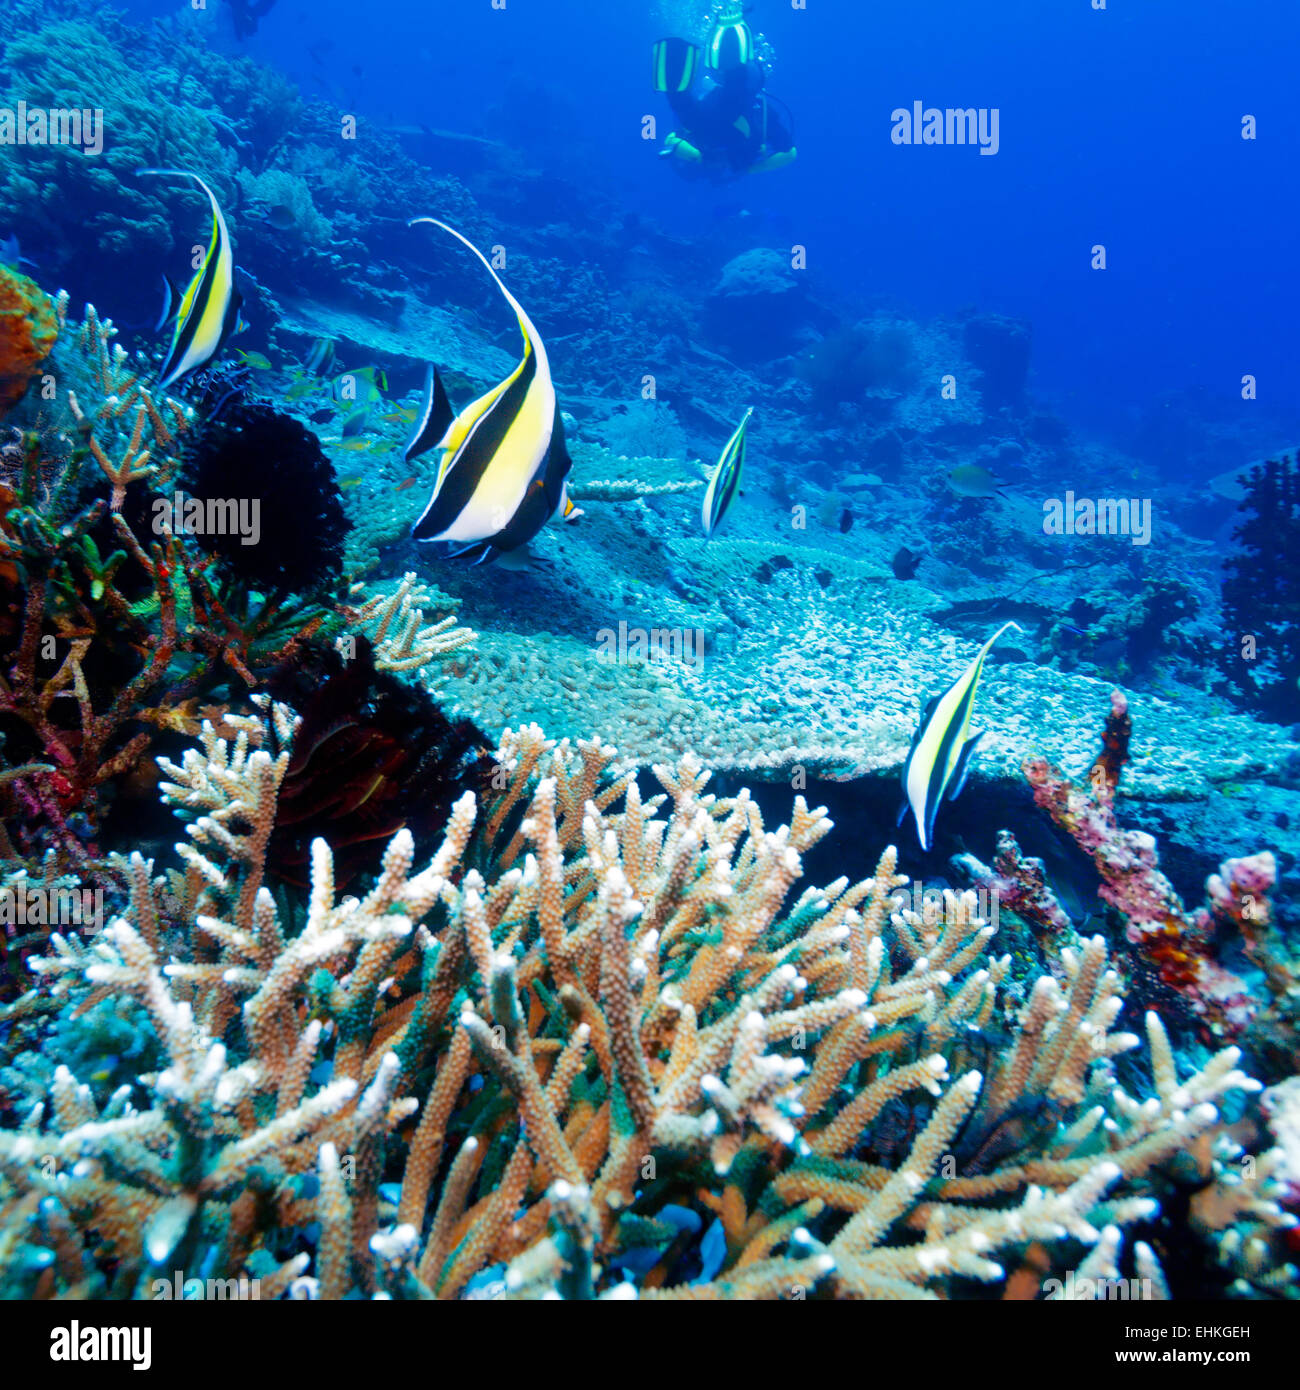 Underwater Landscape with Many Fishes near Tropical Coral Reef, Bali, Indonesia Stock Photo